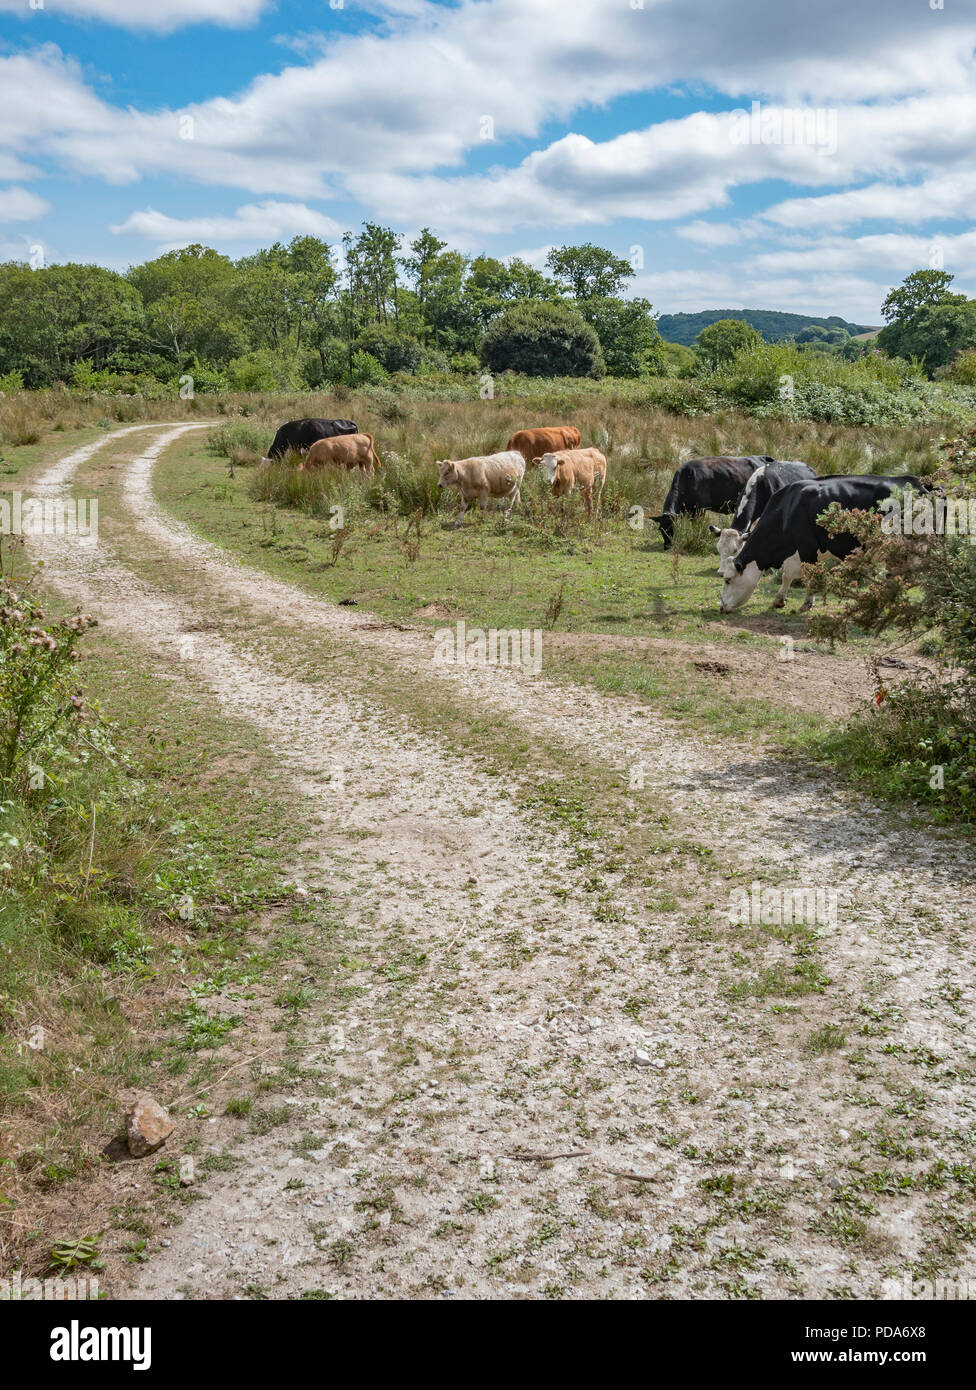 Dirt track running through field with grazing cow herd / cattle grazing. Long road ahead metaphor. UK cattle and livestock industry. Stock Photo